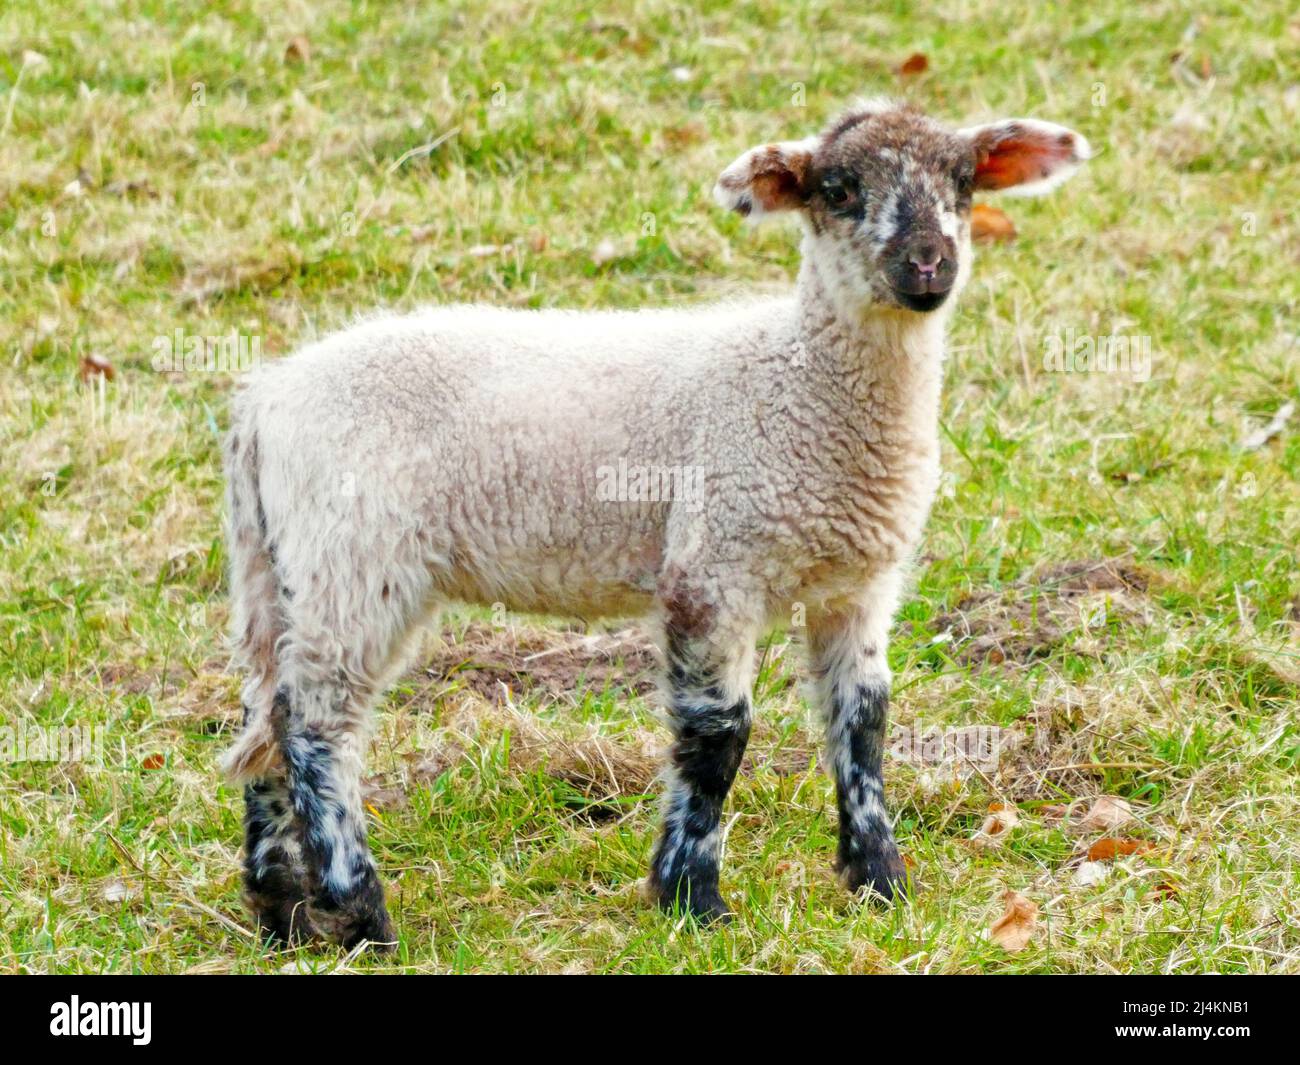 A springtime lamb looking at the photographer. Curious black and white young sheep on a meadow. Stock Photo